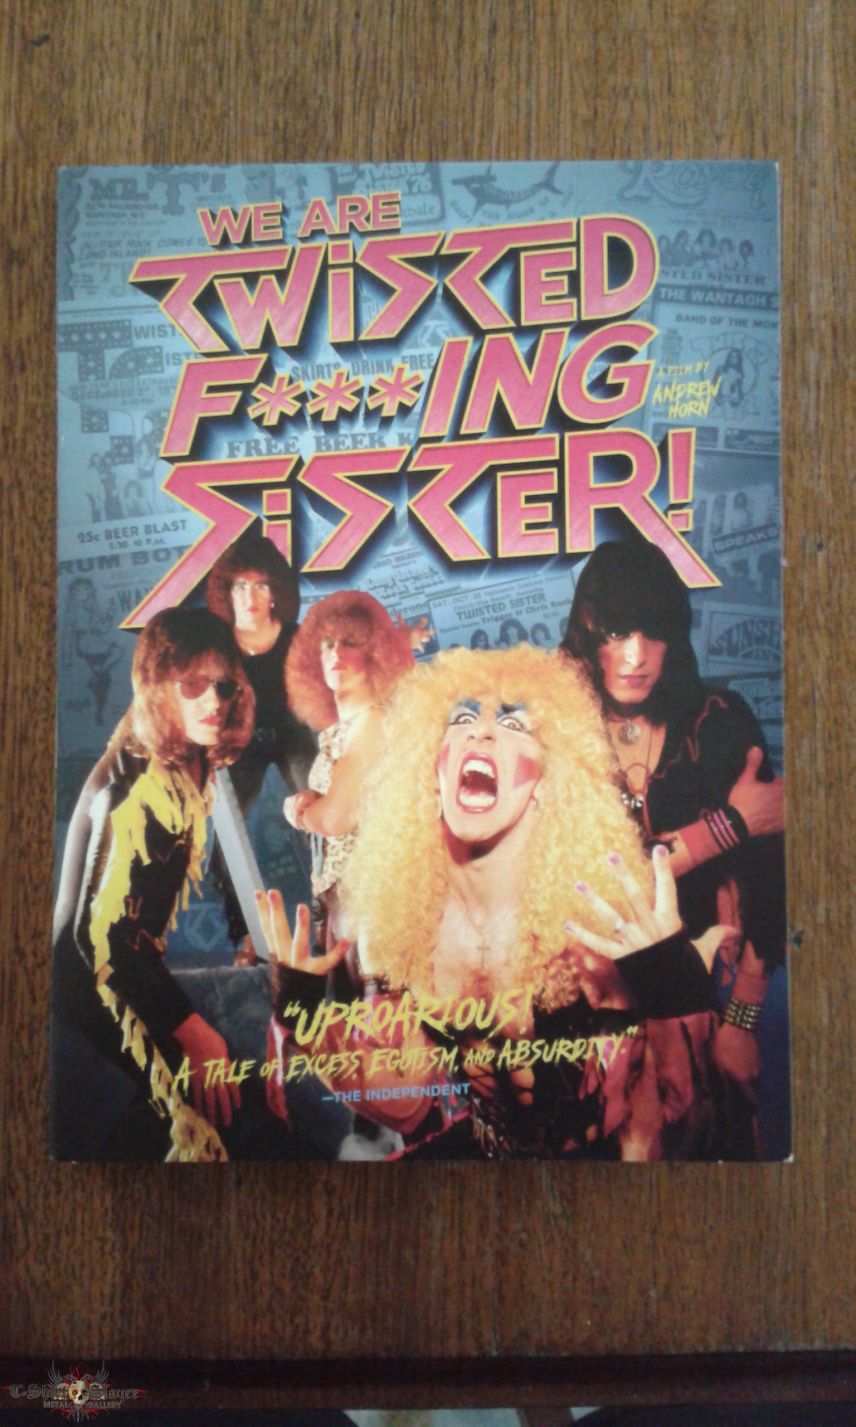 Twisted Sister We Are Twisted Fucking Sister dvd